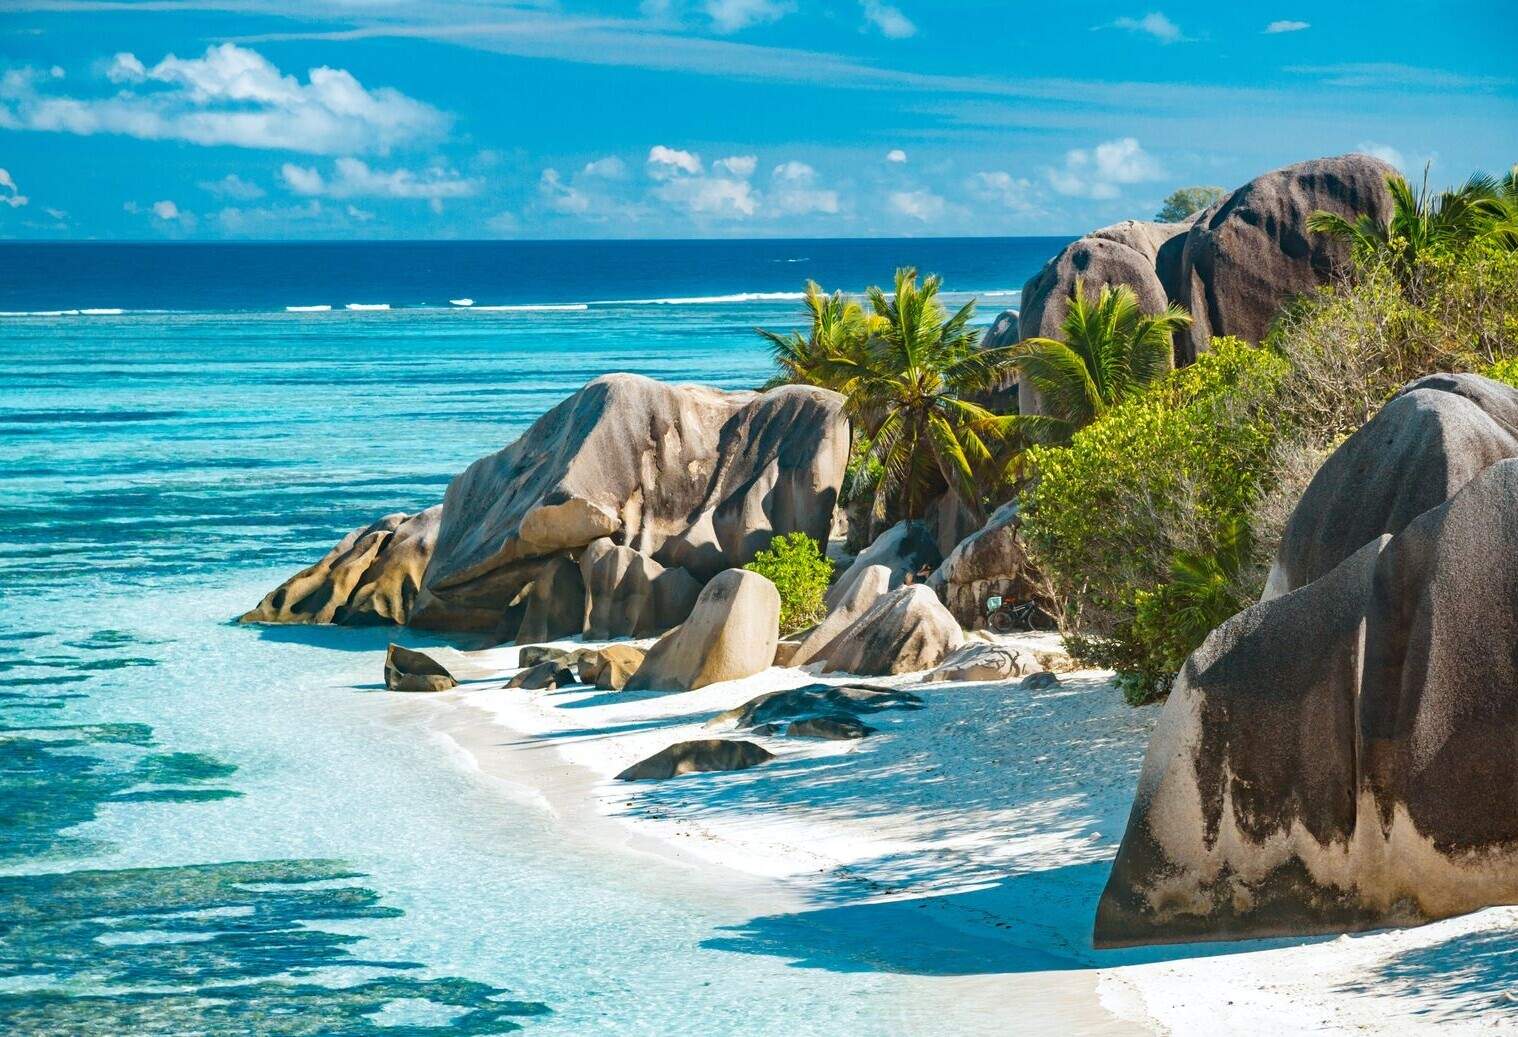 A scenic landscape of rocks emerges on the coast between the lush trees surrounded by turquoise seawater.